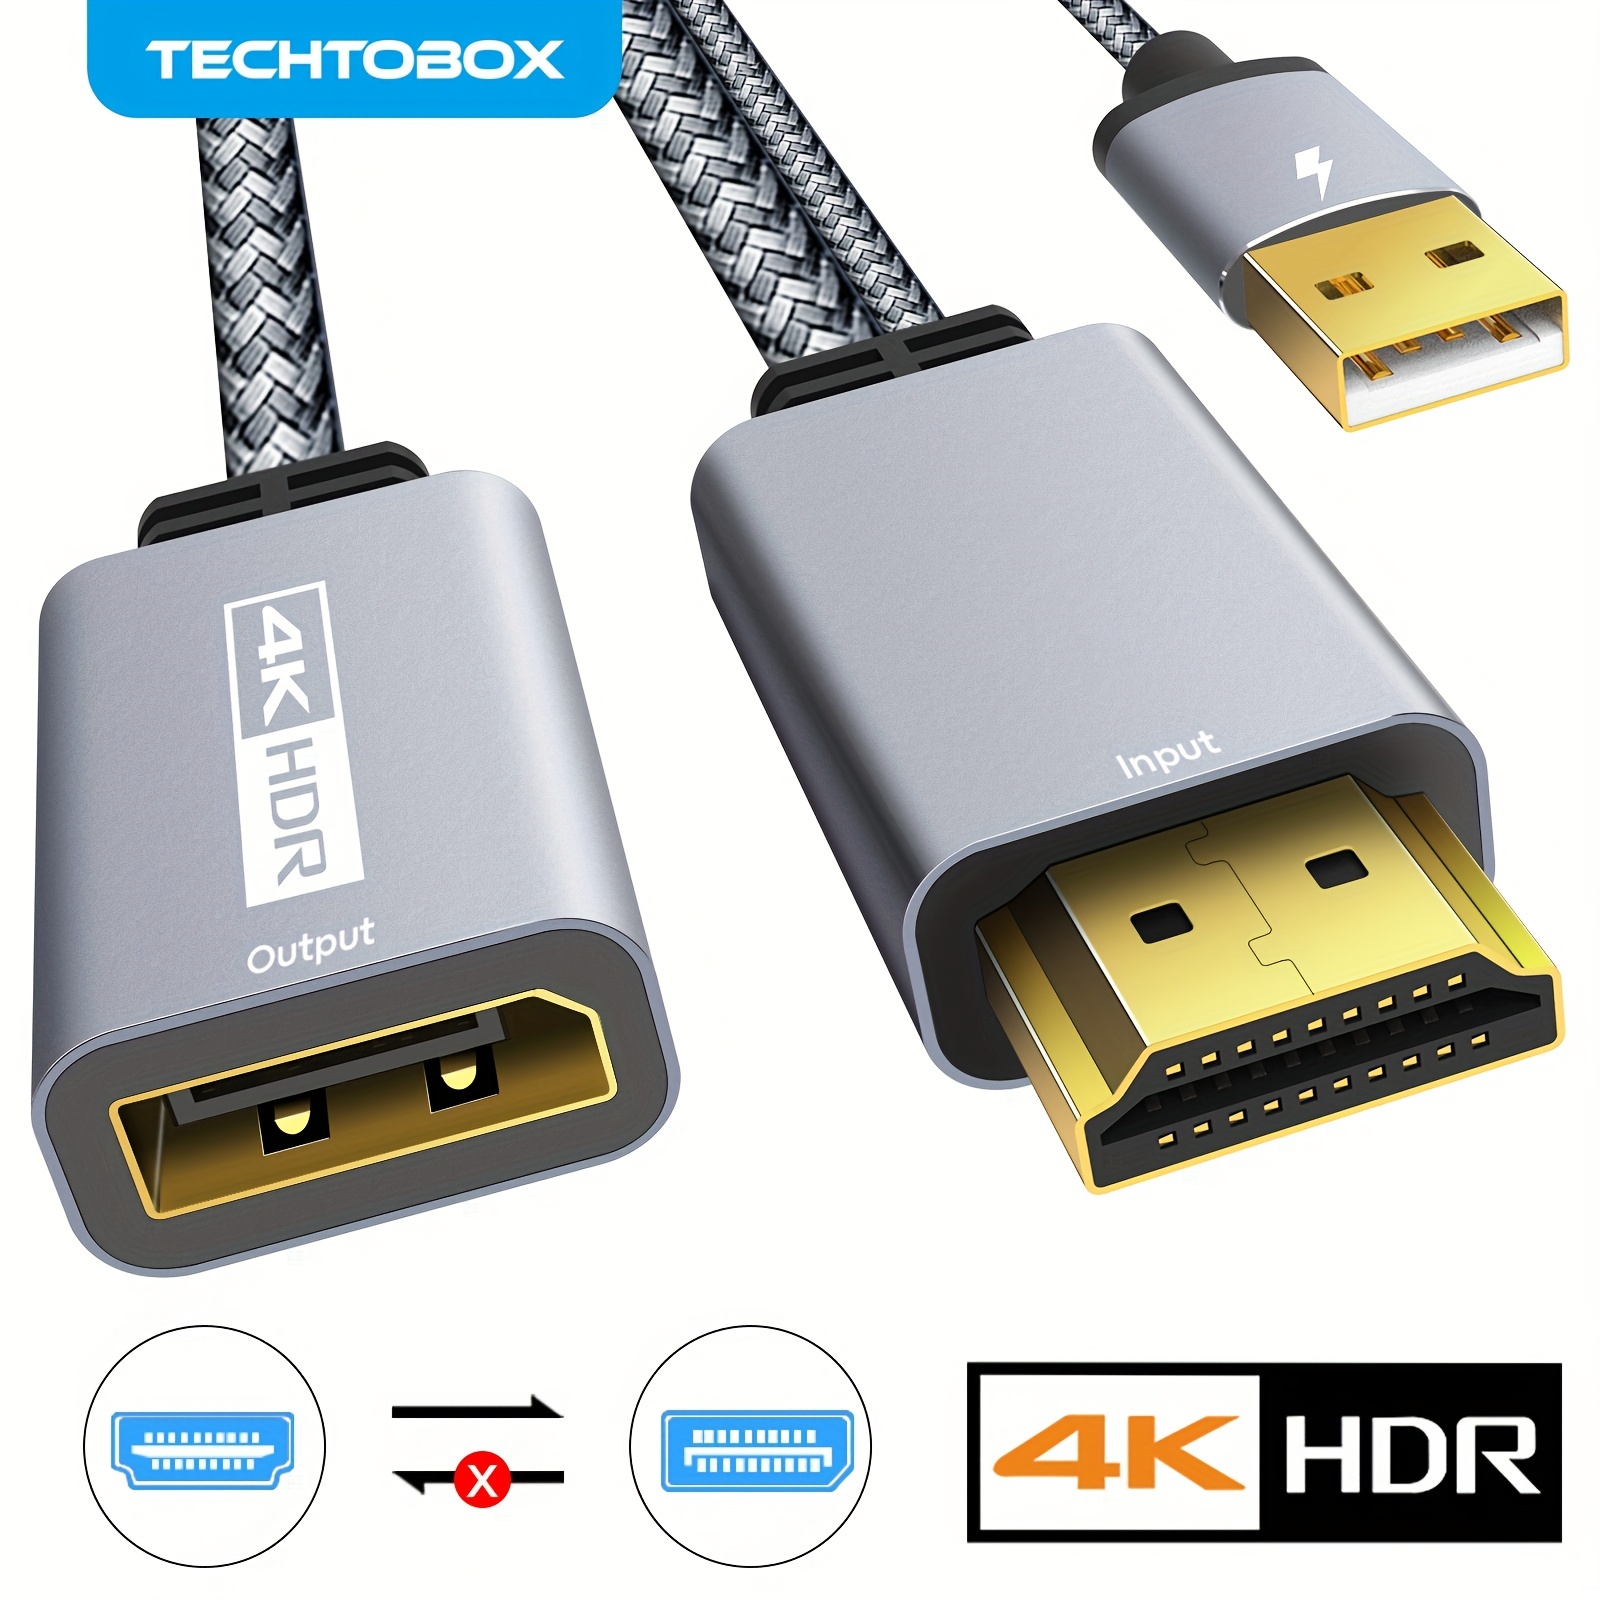 2 PCS 1 set DisplayPort DP to HDMI Cable, 4K*2K Male To Female Display Port  to HDMI Adapter Converter Black Laptop PC for HP/DELL 2 packs 